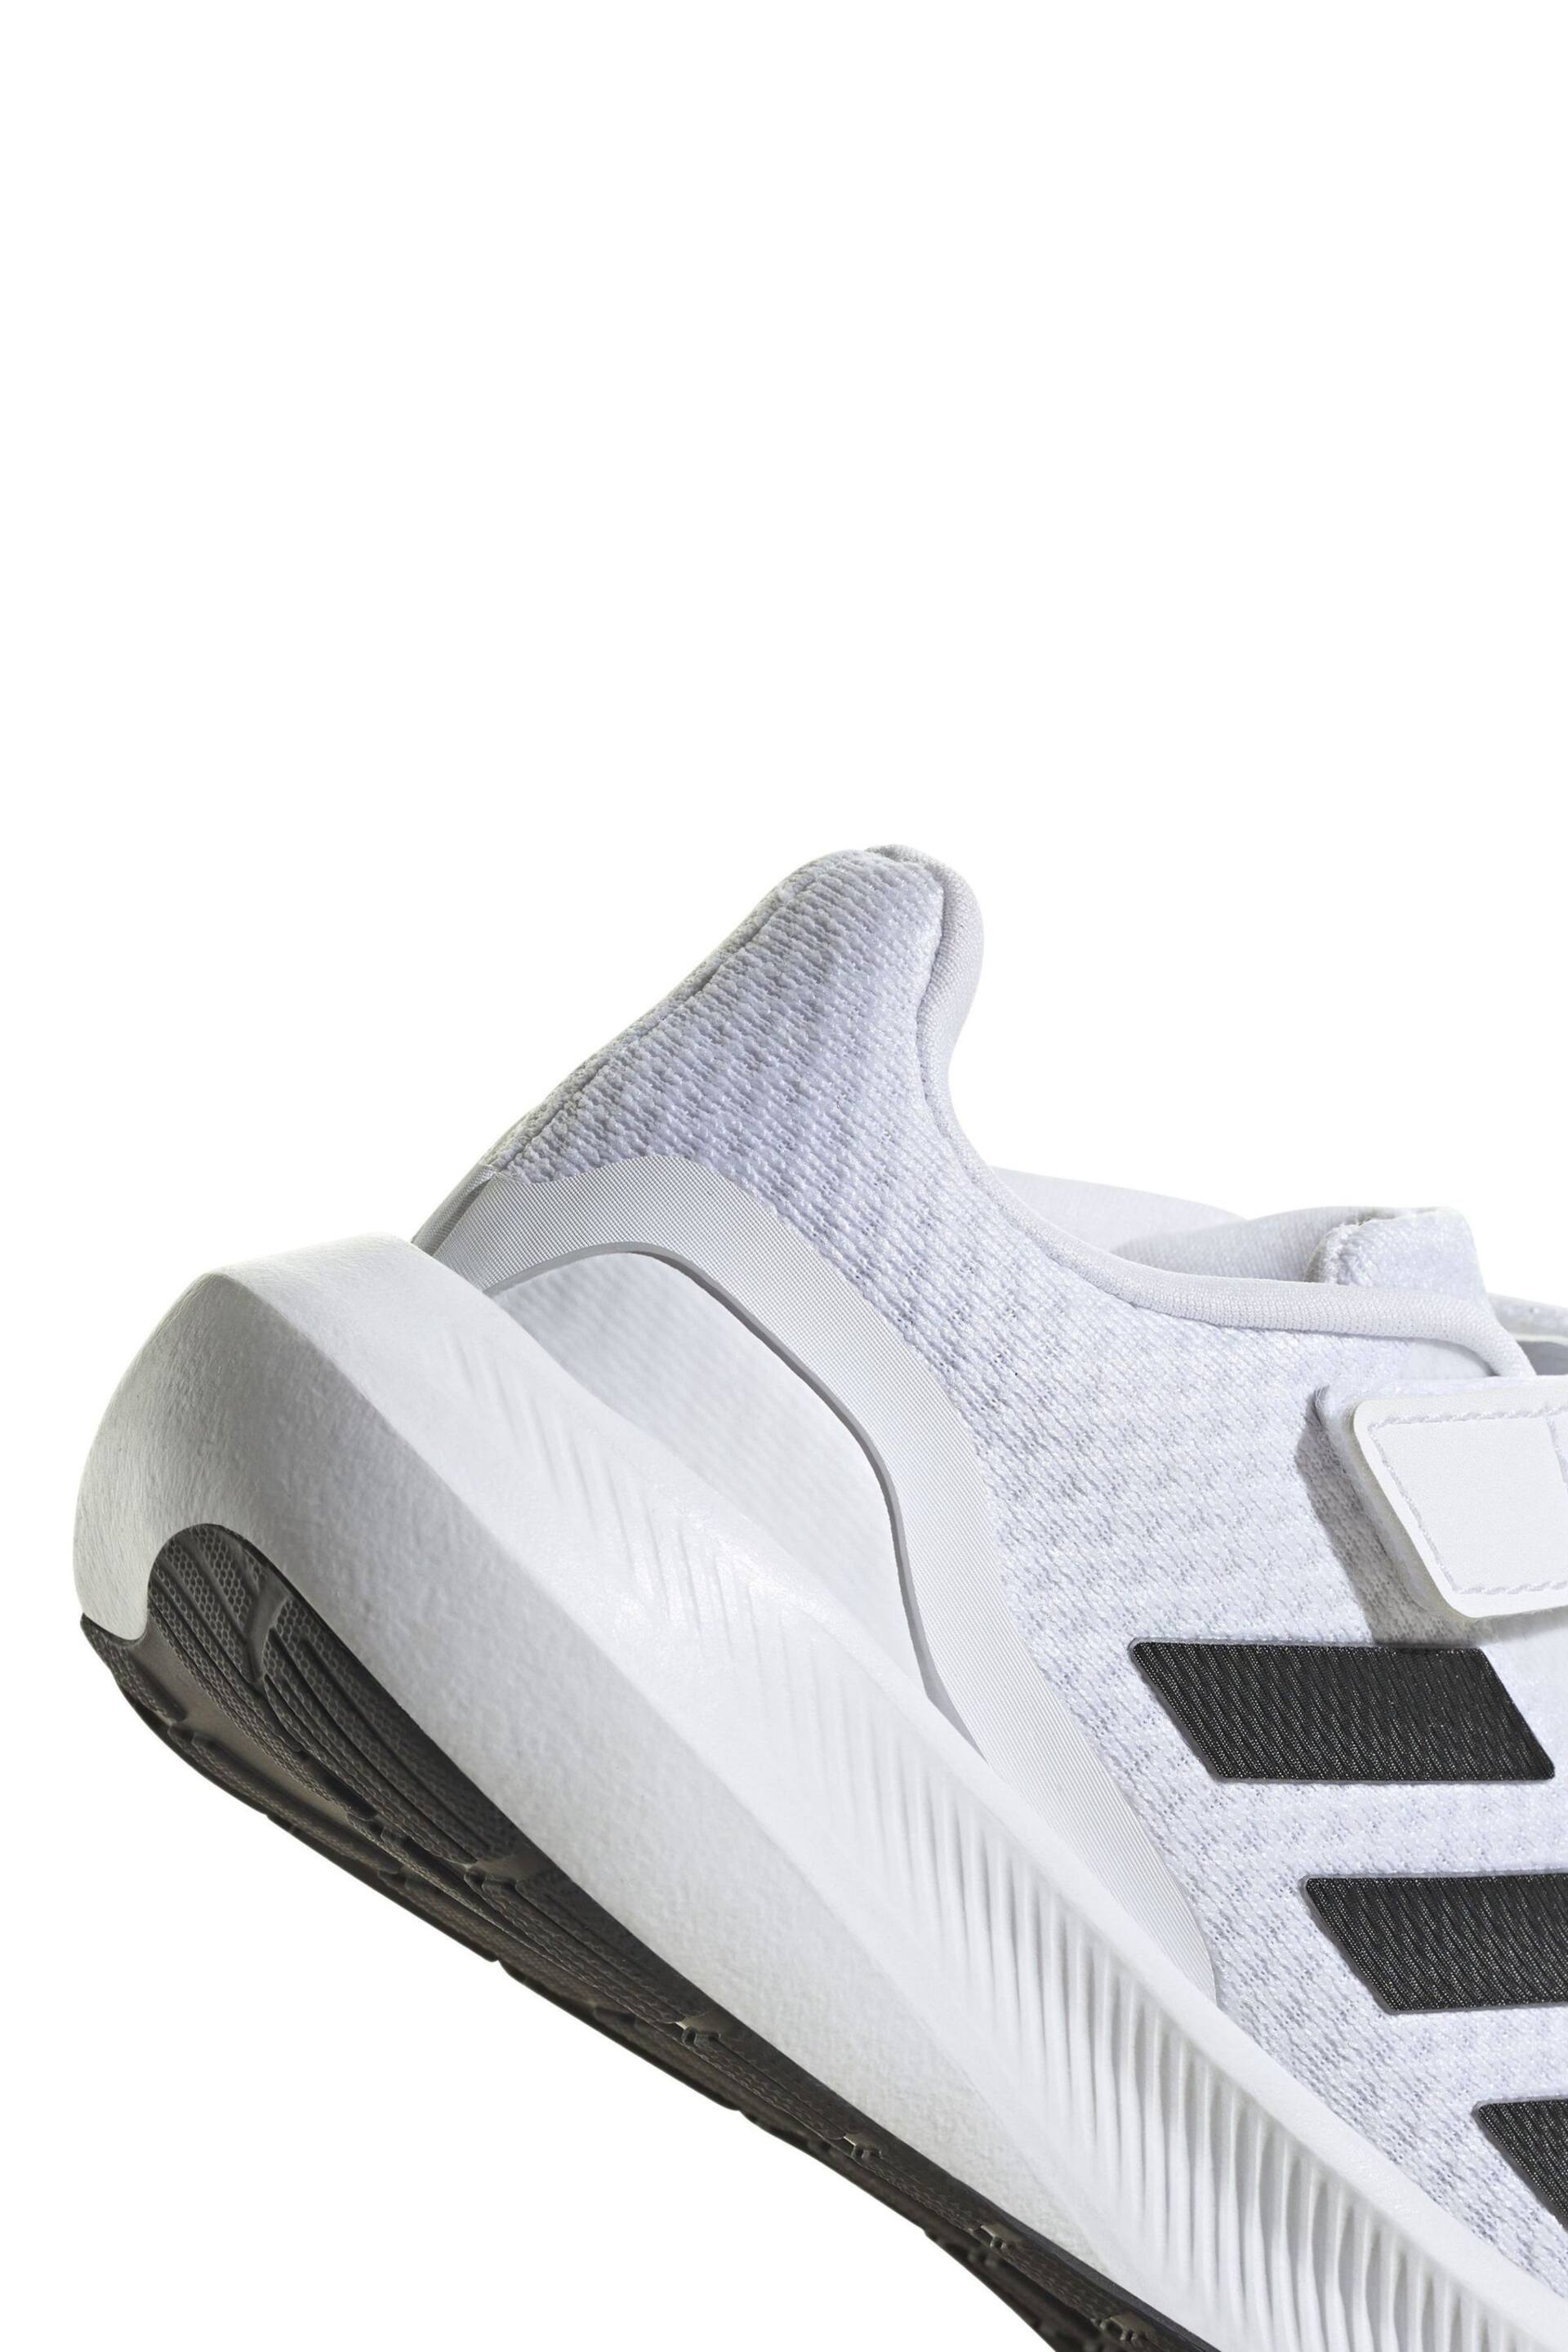 adidas White Sportswear Runfalcon 3.0 Elastic Lace Top Strap Trainers - Image 9 of 9